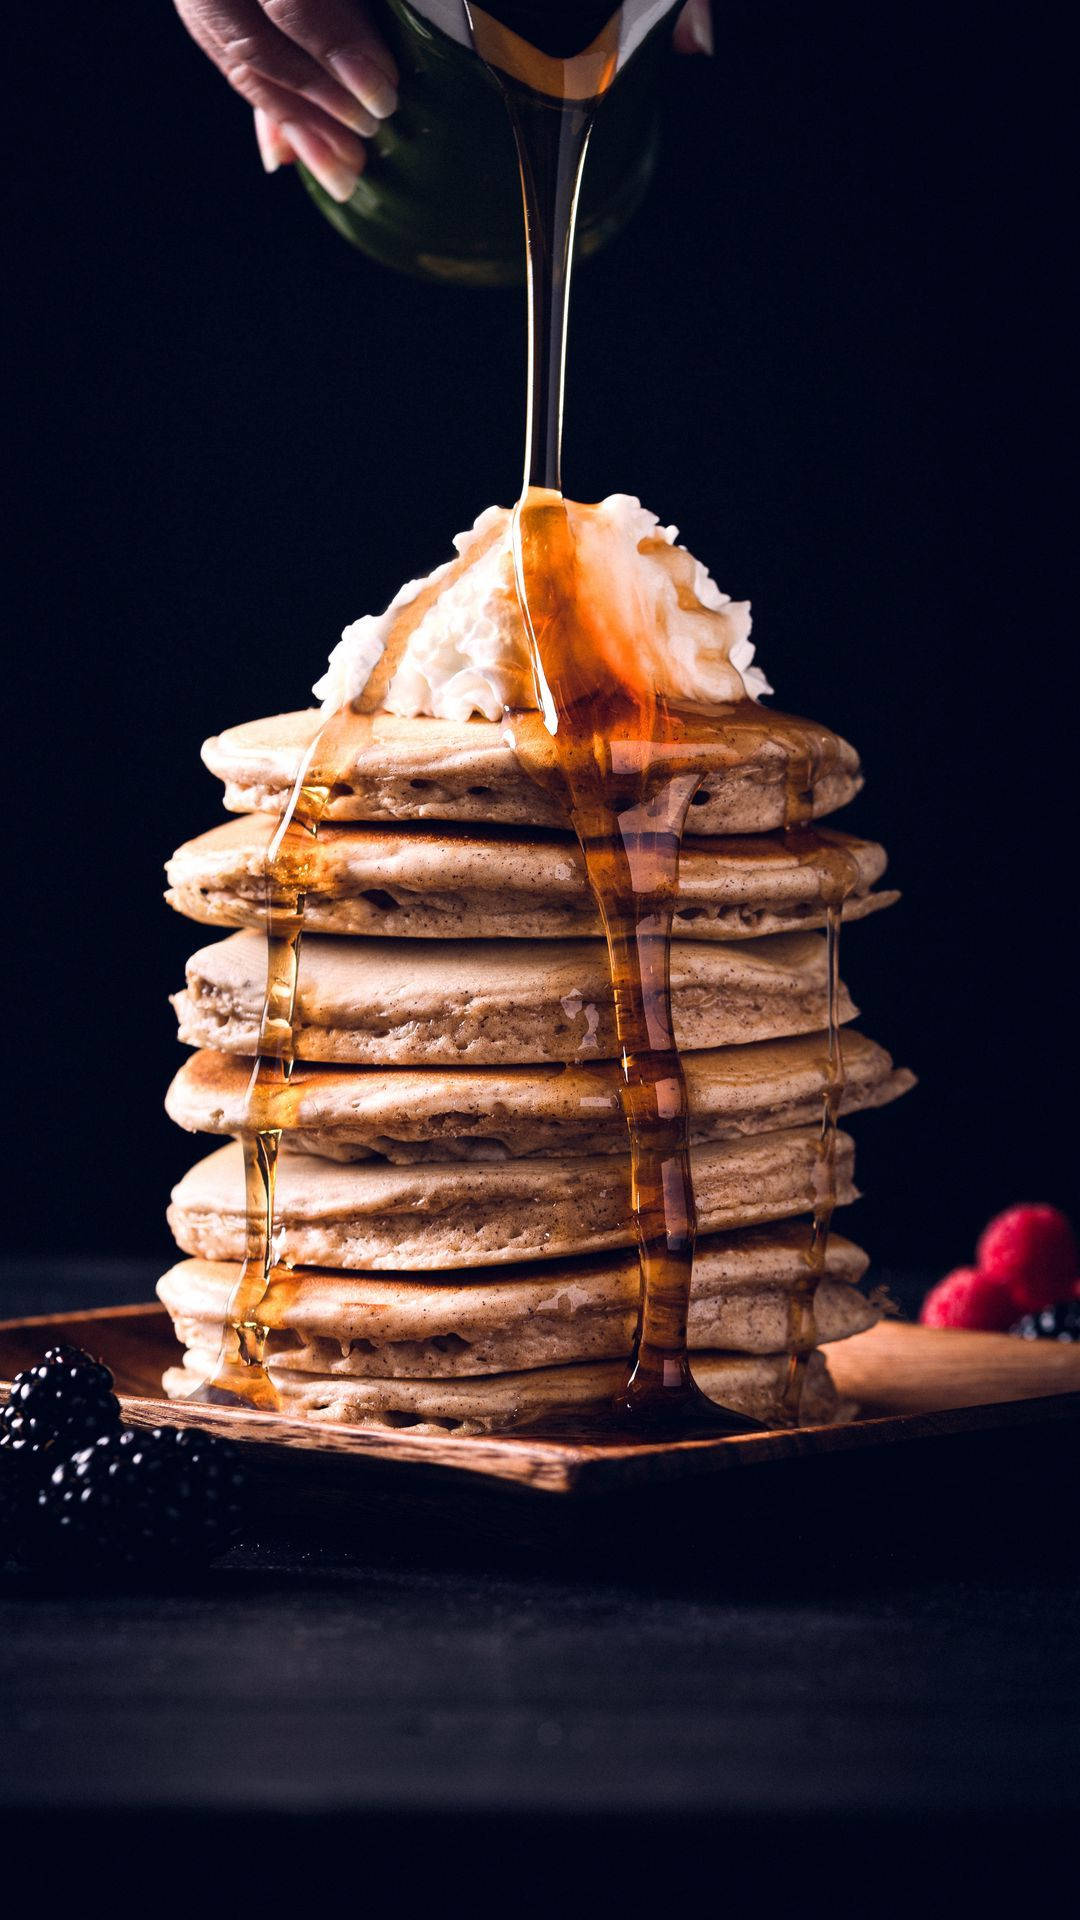 Pancakes With Whipped Cream Background